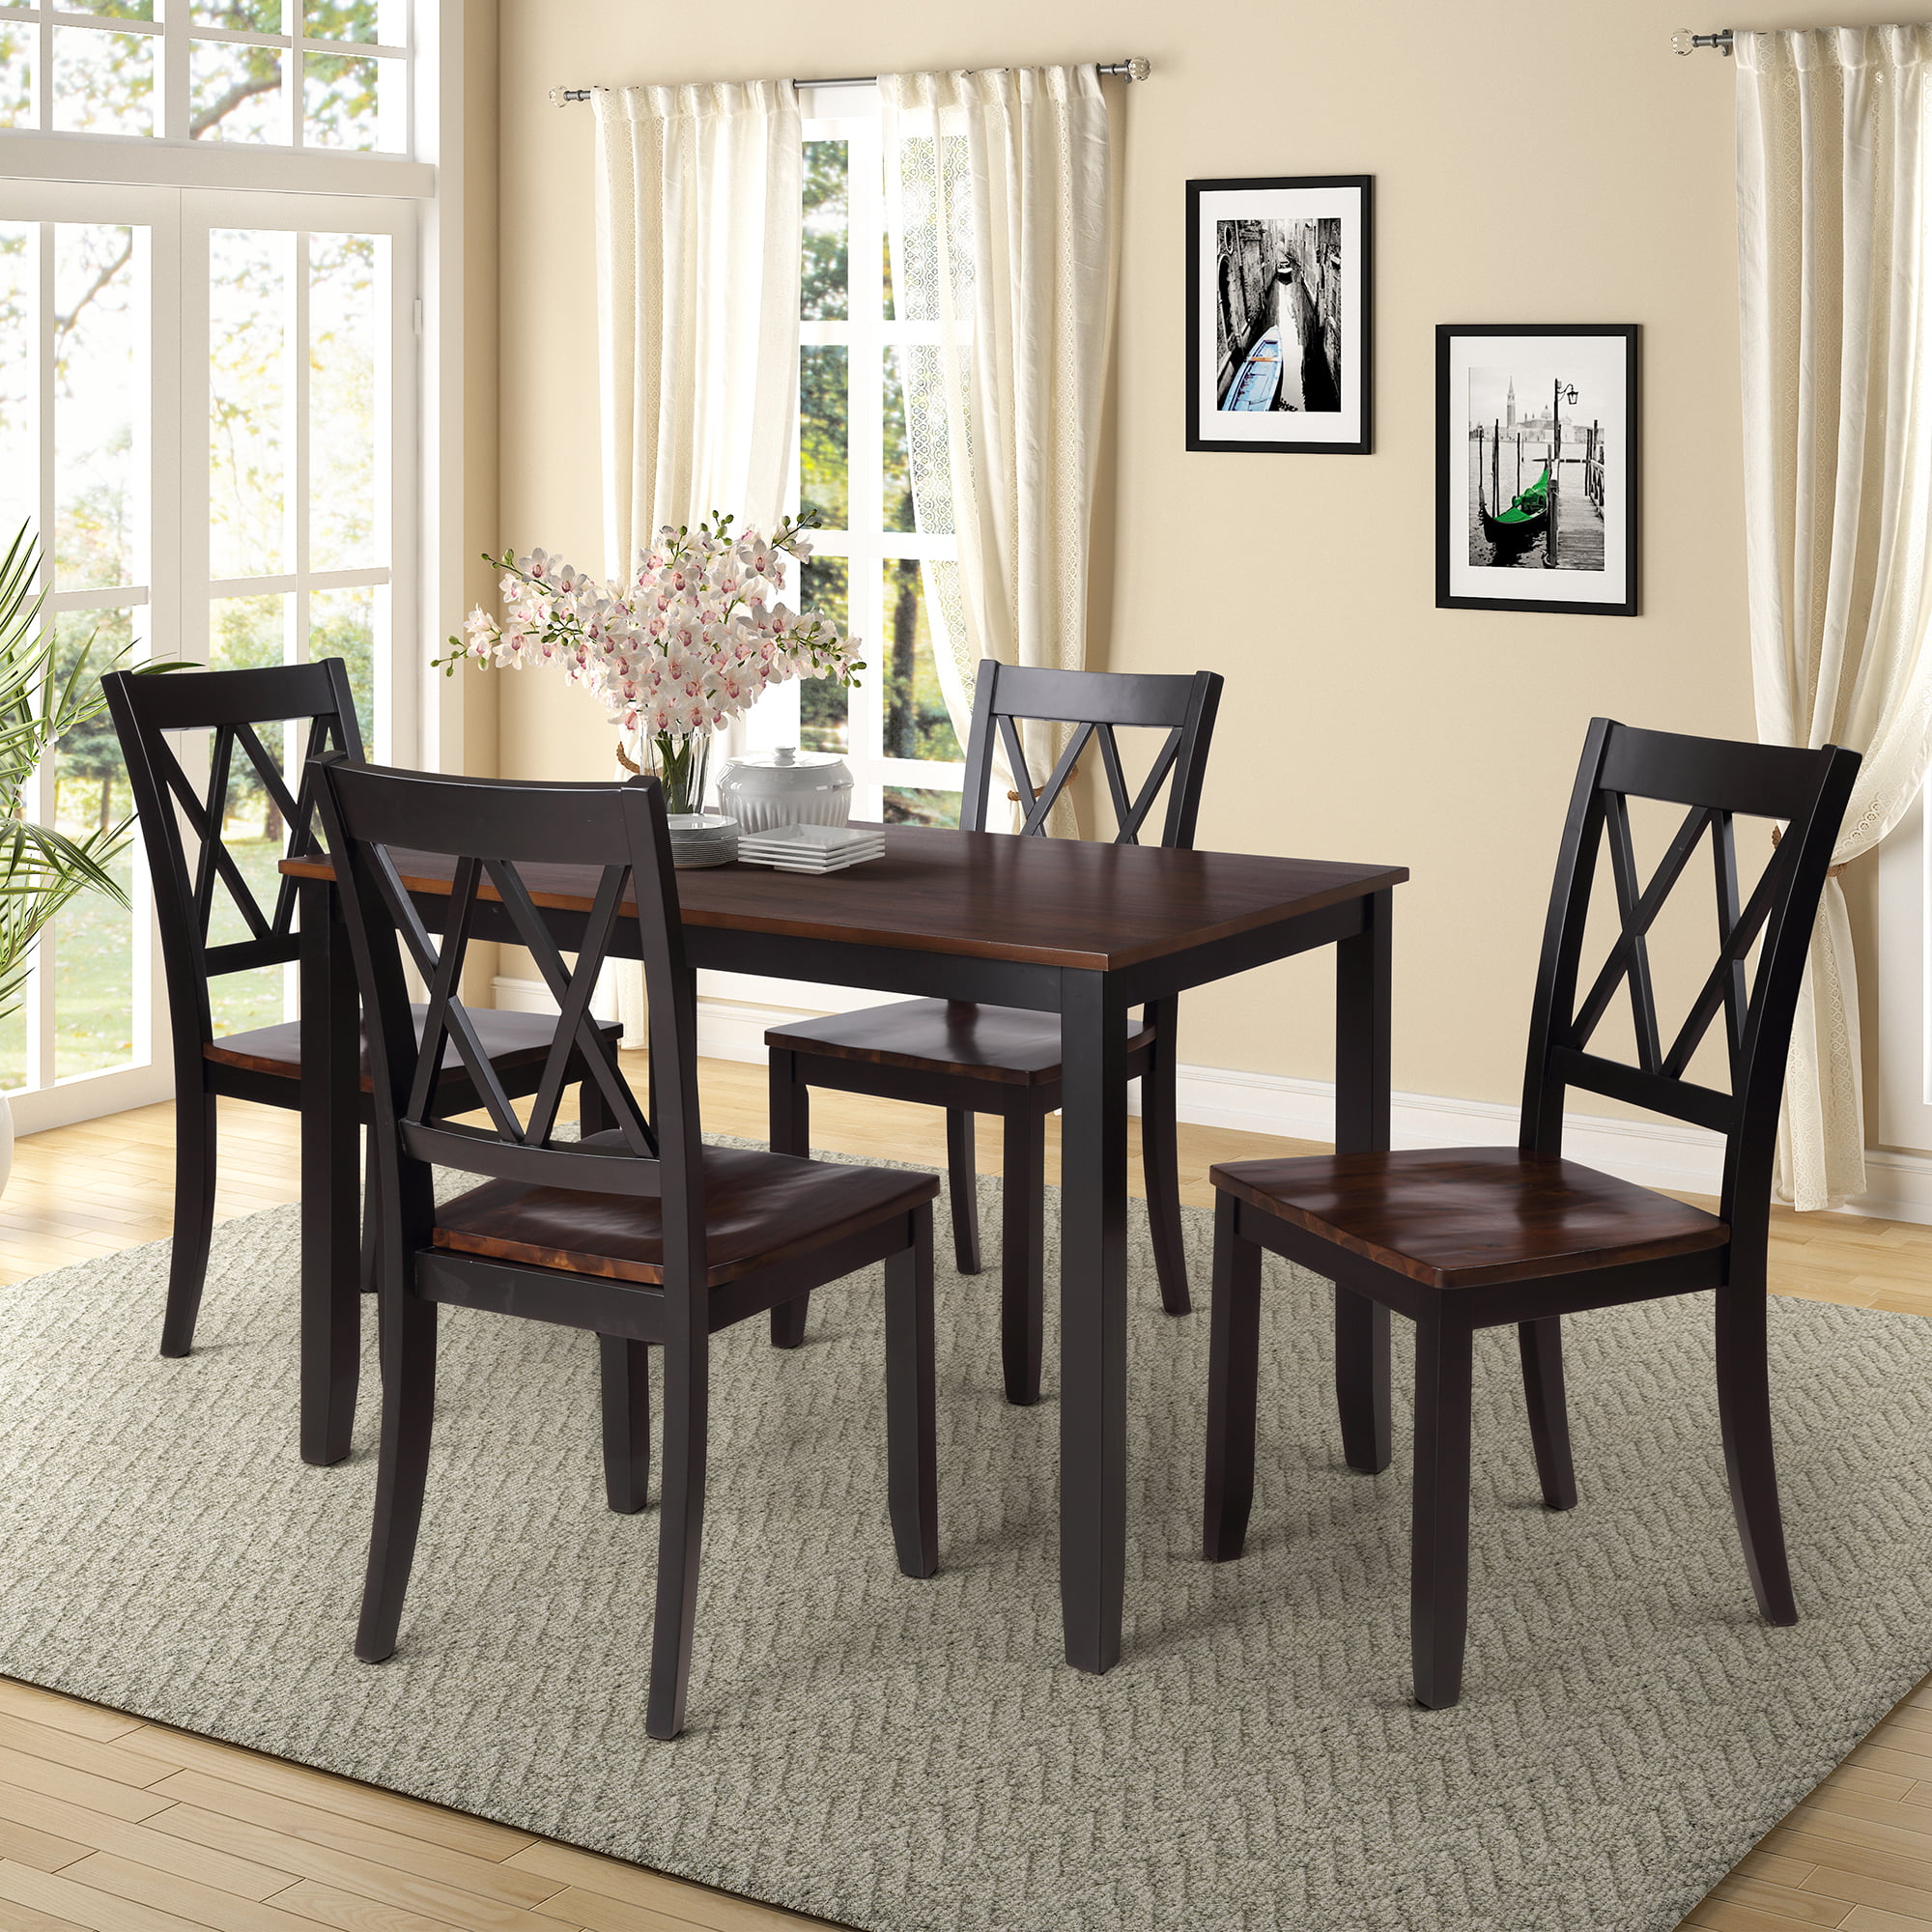 Urhomepro Wooden Dining Table Set, Small Dining Room Sets For 4